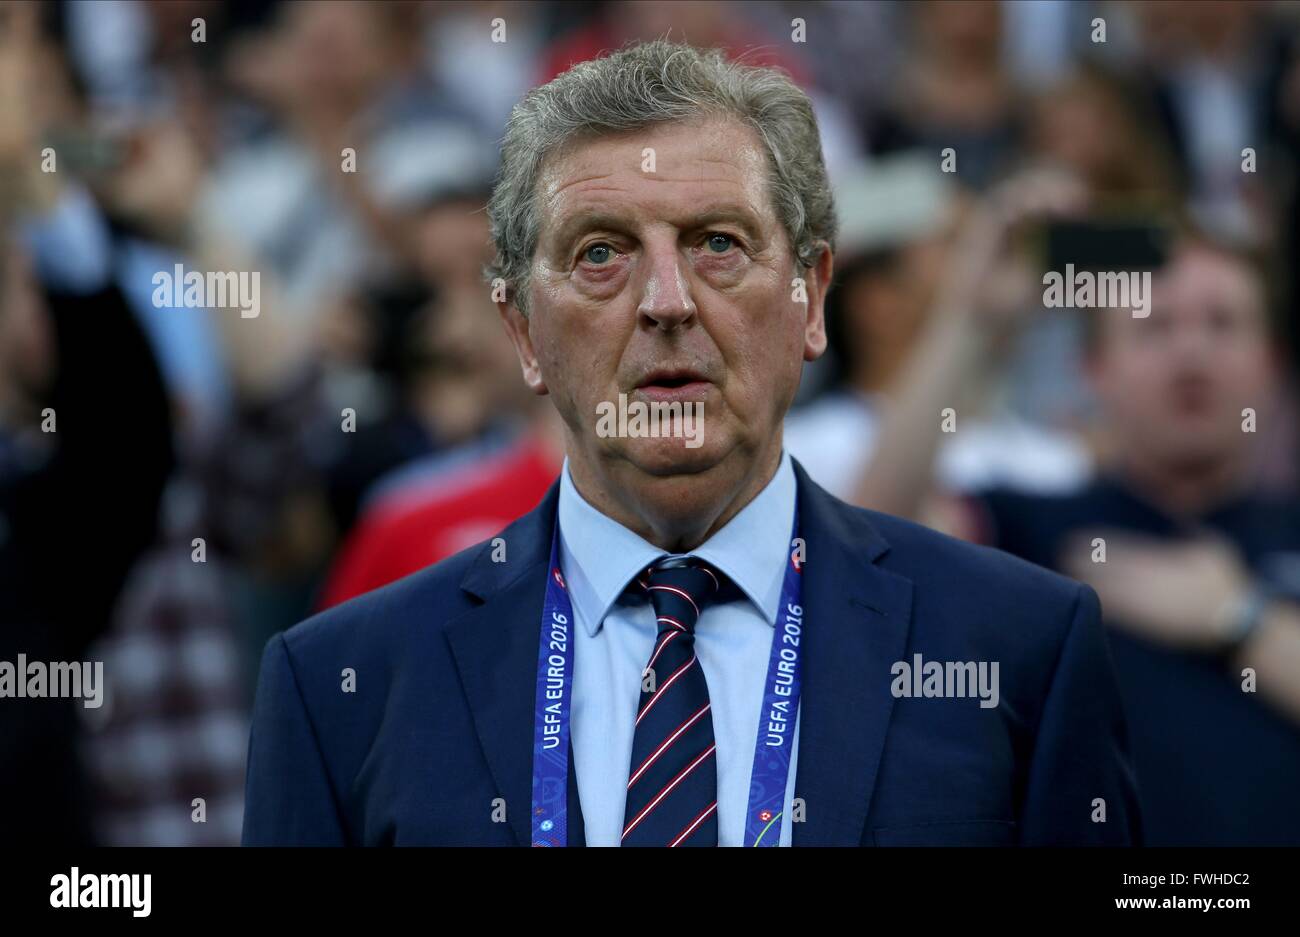 ENGLAND MANAGER ROY HODGSON  ENGLAND V RUSSIA  ENGLAND V RUSSIA, EURO 2016 GROUP B  STADE VELODROME, MARSEILLE, FRANCE  12 June 2016  GAY96435      ENGLAND V RUSSIA, EURO 2016 Group B 11/06/2016        WARNING! This Photograph May Only Be Used For Newspaper And/Or Magazine Editorial Purposes. May Not Be Used For Publications Involving 1 player, 1 Club Or 1 Competition  Without Written Authorisation From Football DataCo Ltd.  For Any Queries, Please Contact Football DataCo Ltd on +44 (0) 207 864 9121 Stock Photo